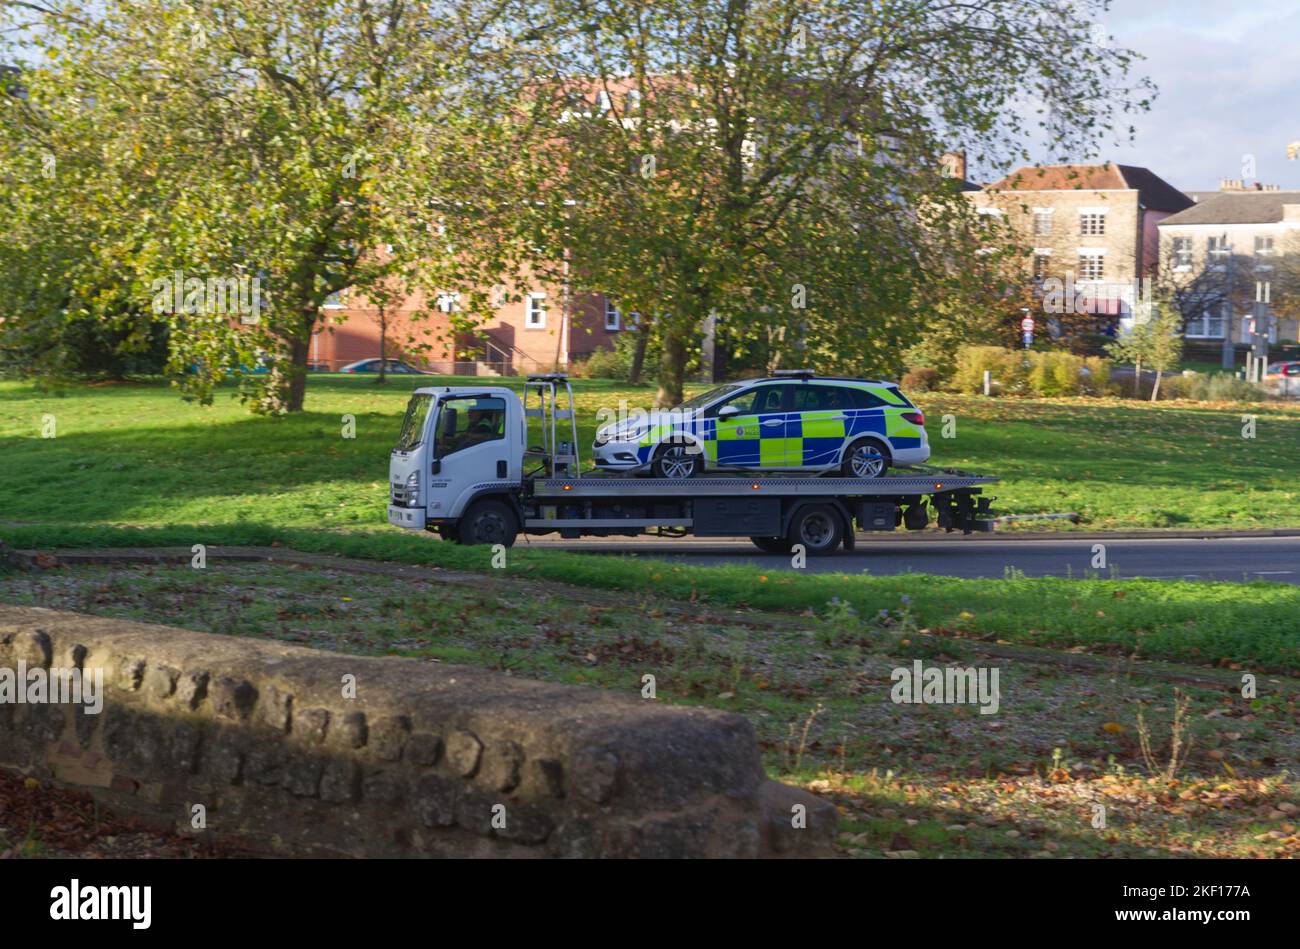 Police car being transported on the back of a truck in Colchester, Essex Stock Photo